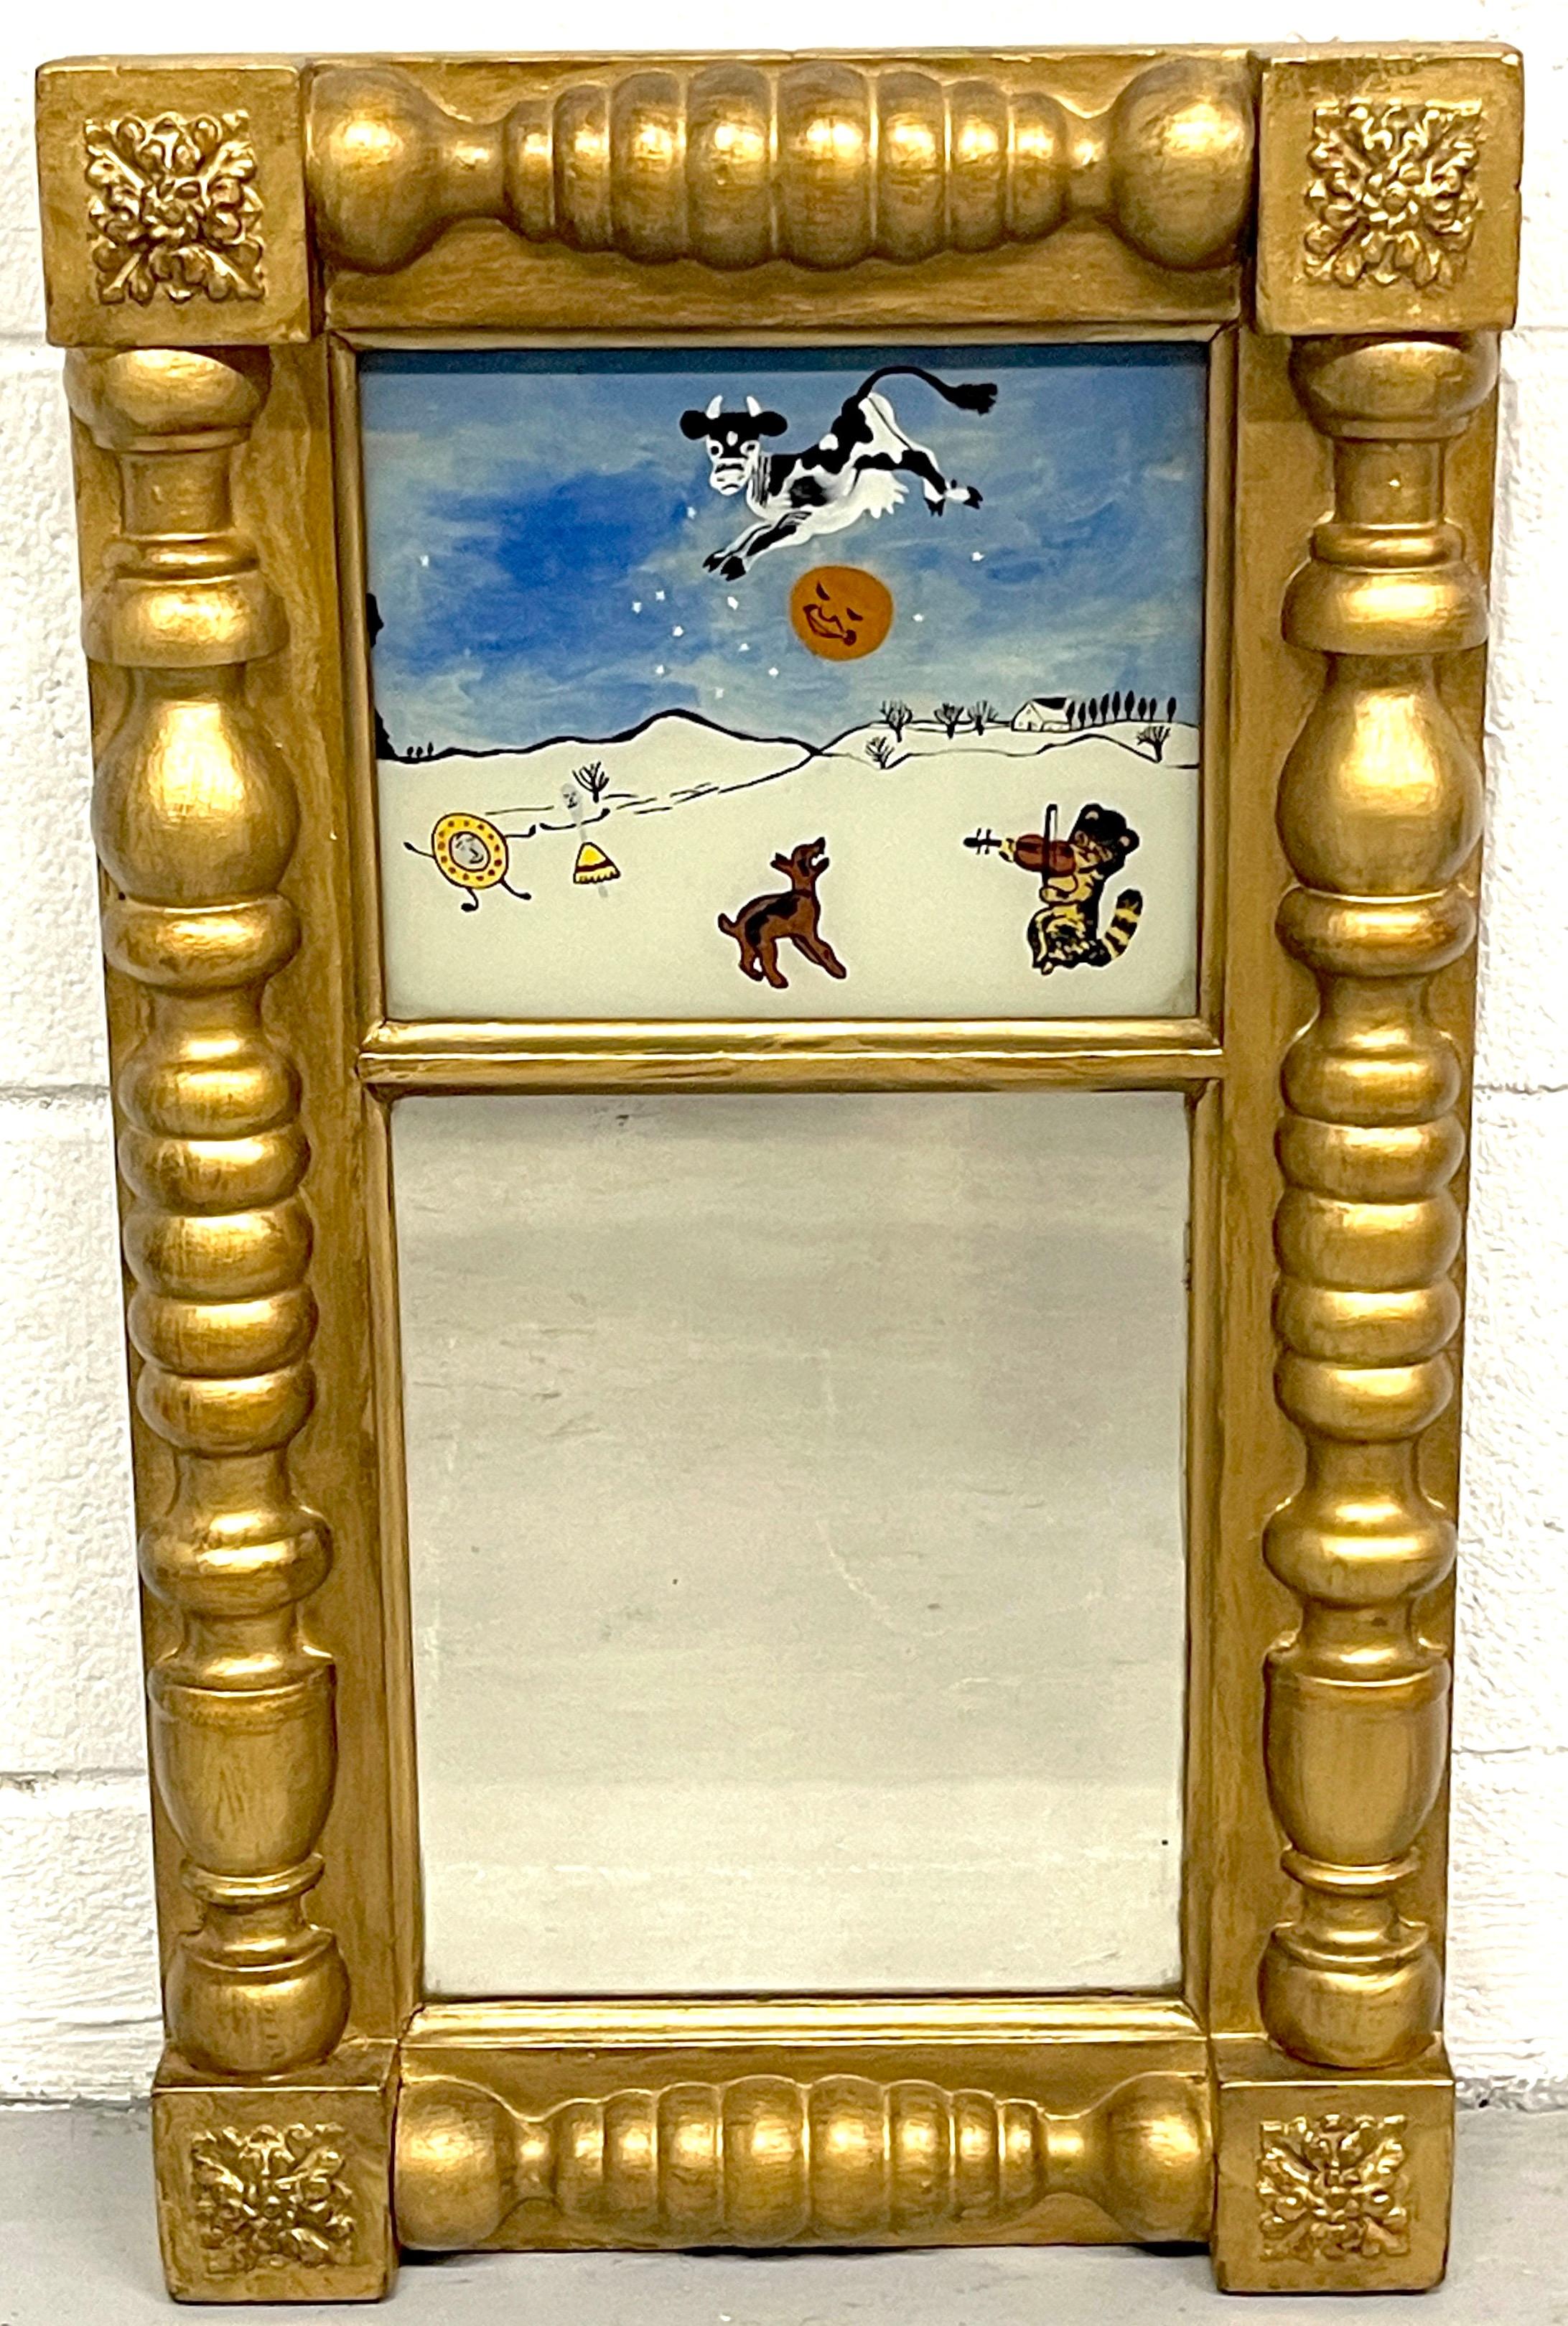 Antique English Reverse Painted 'Hey Diddle Diddle' Eglomise Child's Mirror 
England, Circa 1850s

A true rarity, a diminutive gilt Eglomise /reverse painted mirror depicting the English nursery rhyme Hey diddle, diddle!.
Finely executed with